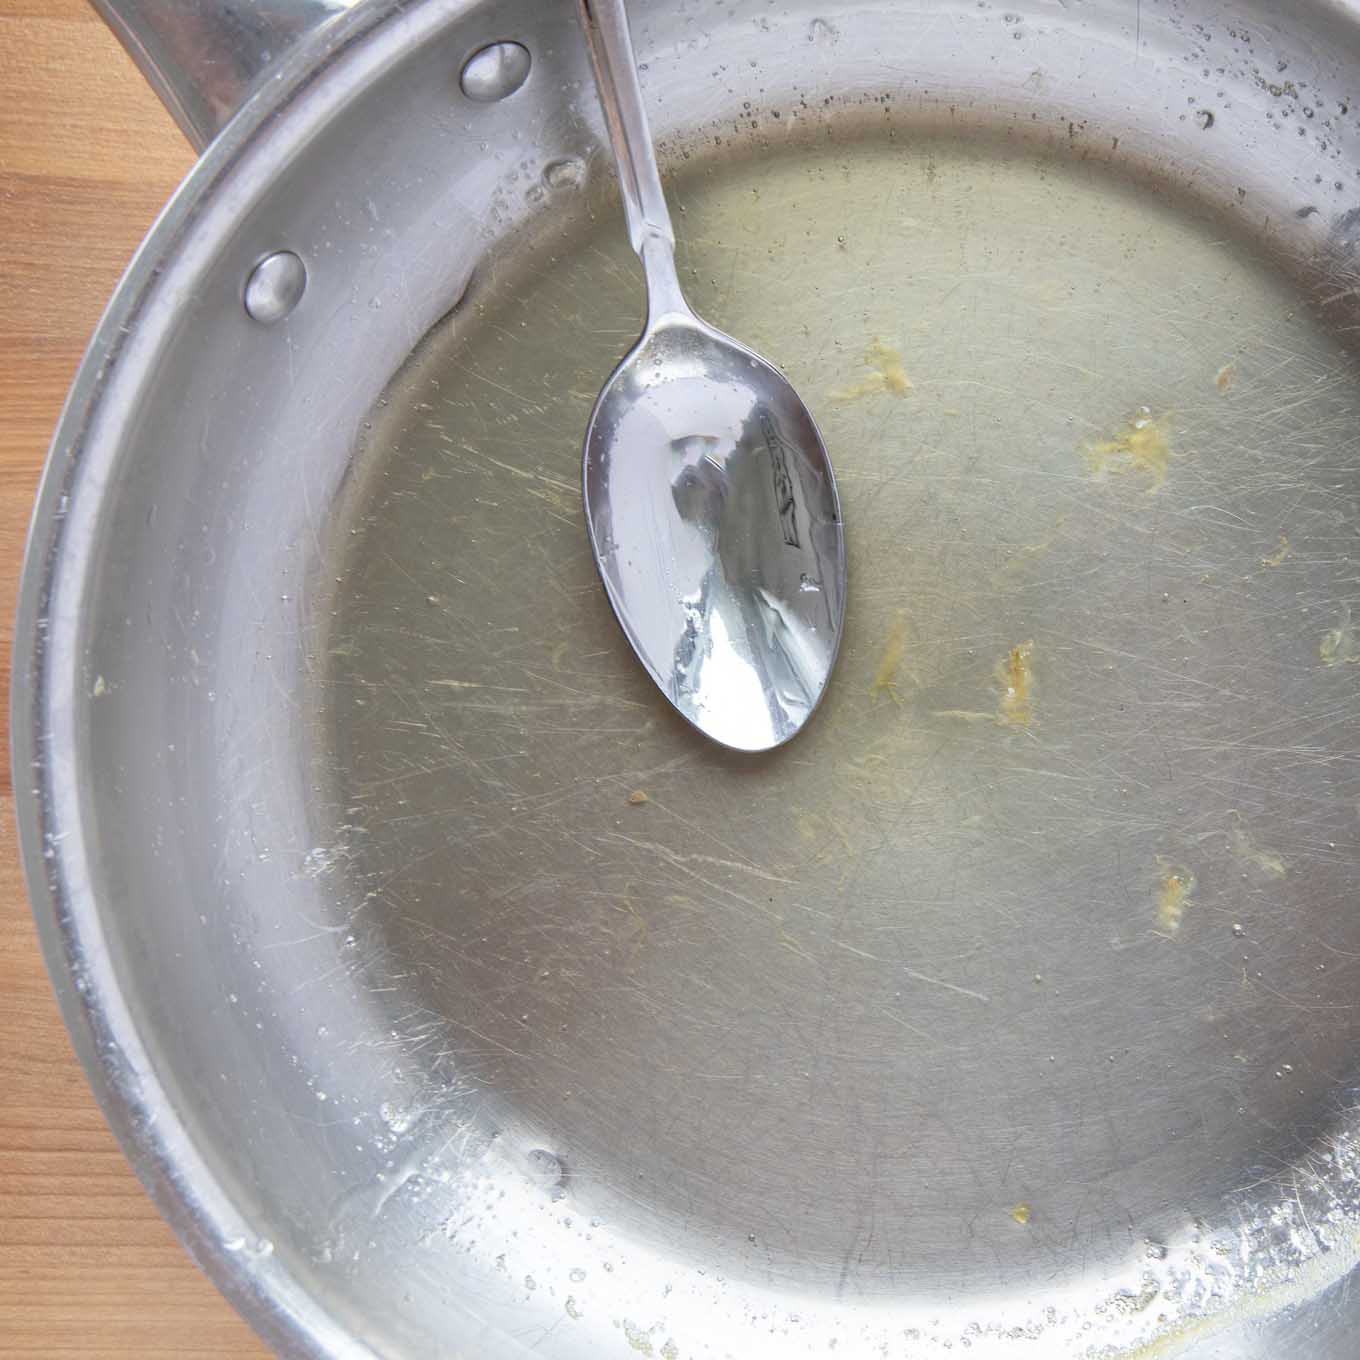 lemon syrup and a spoon in a saute pan